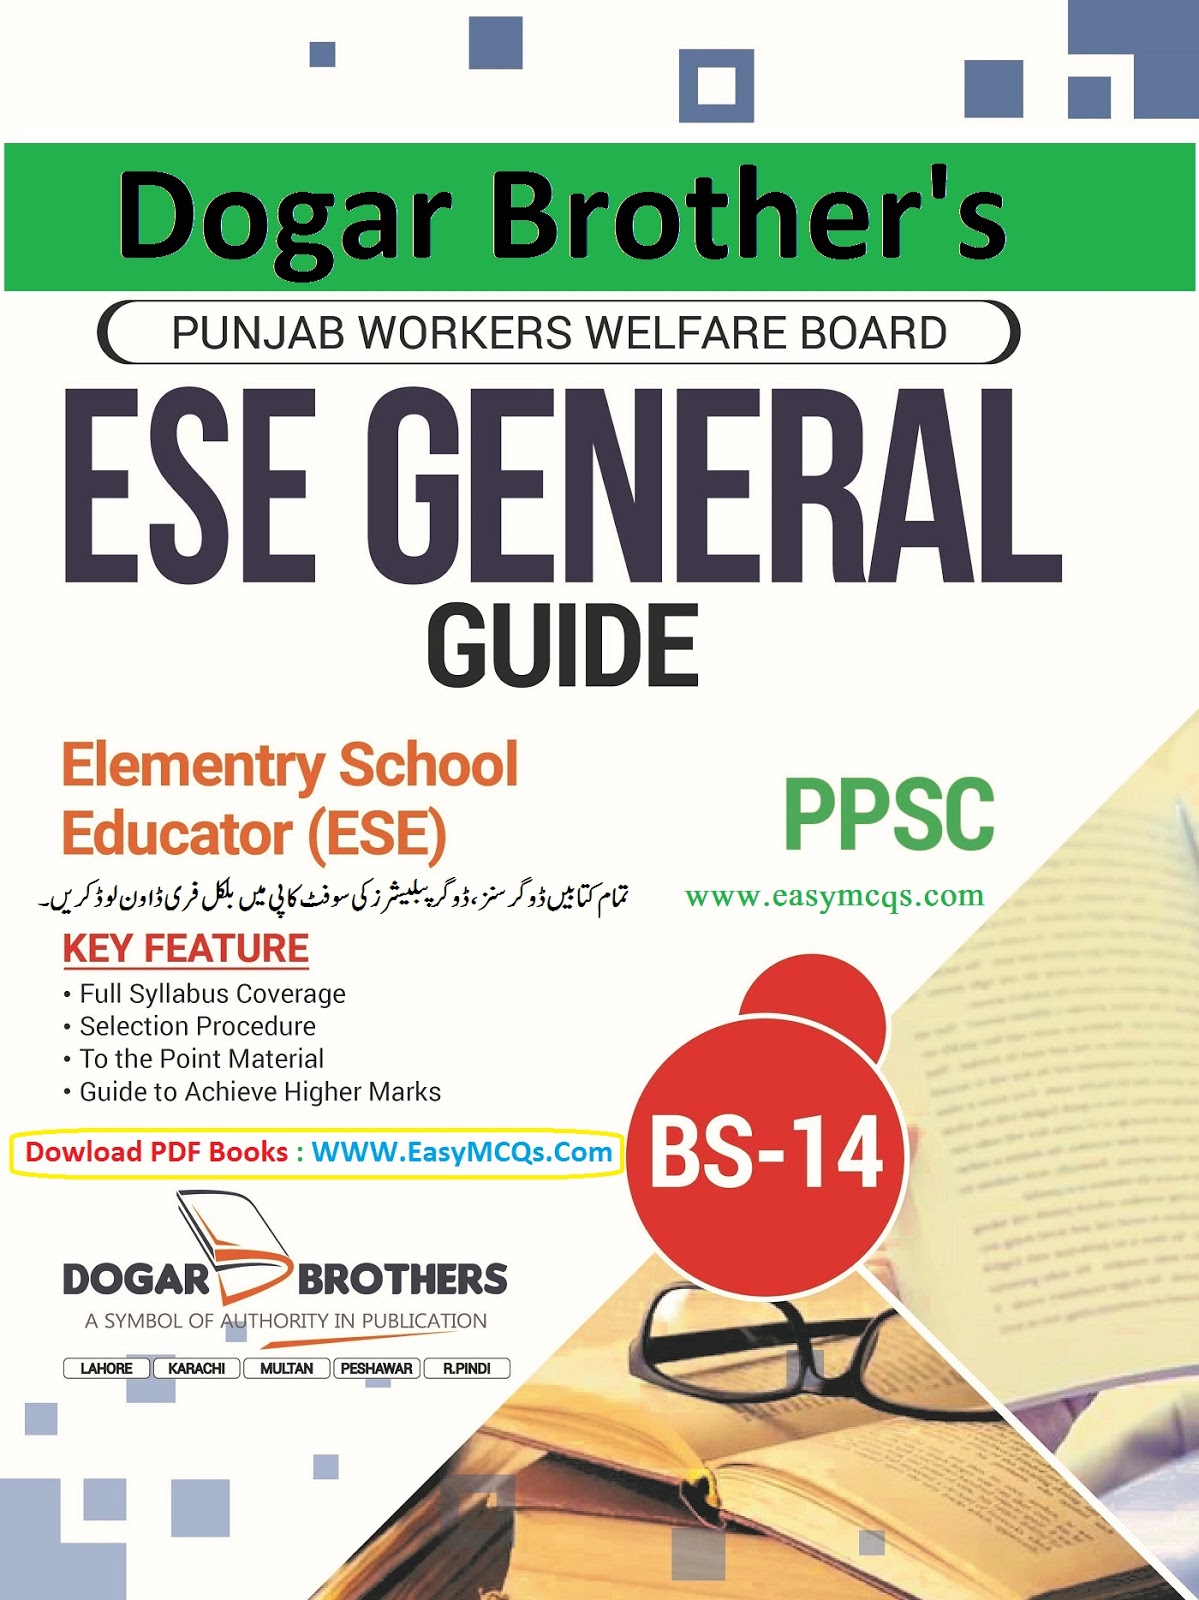 ese-general-multiple-choice-questions-dogar-brothers-pdf-book-easy-mcqs-quiz-test